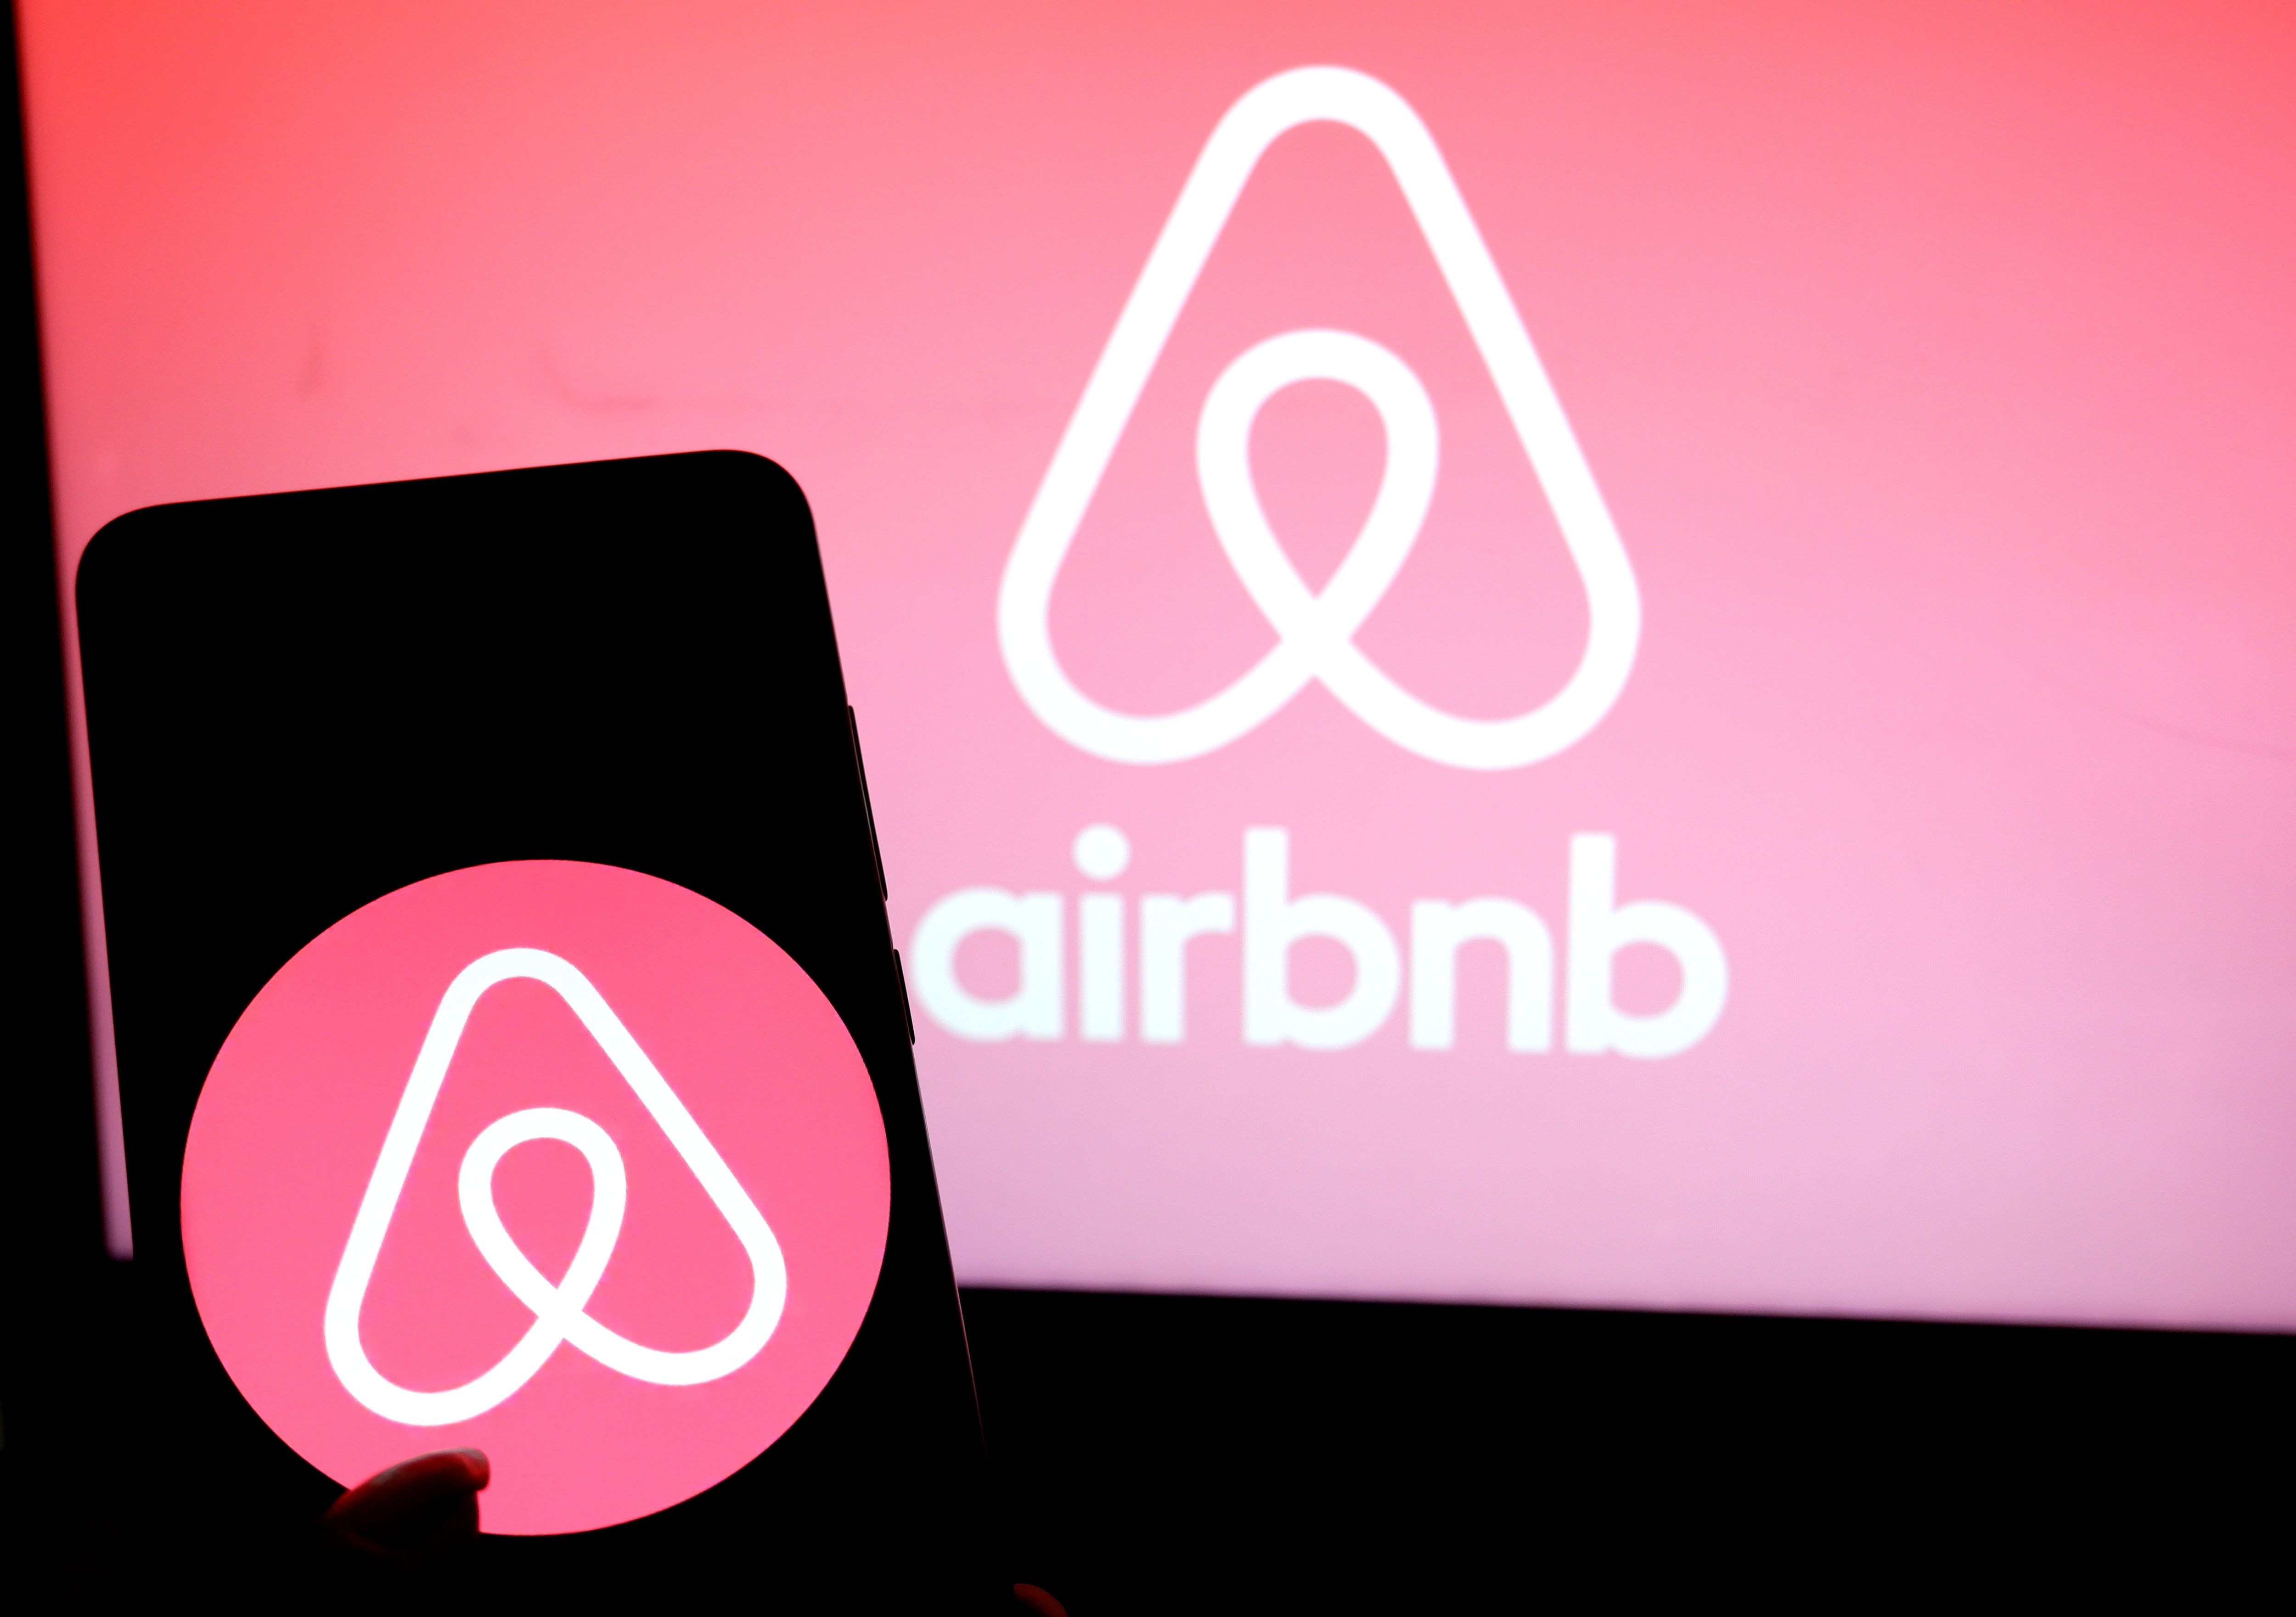 Armed robbery at Airbnb under investigation, days after 'party house' ban